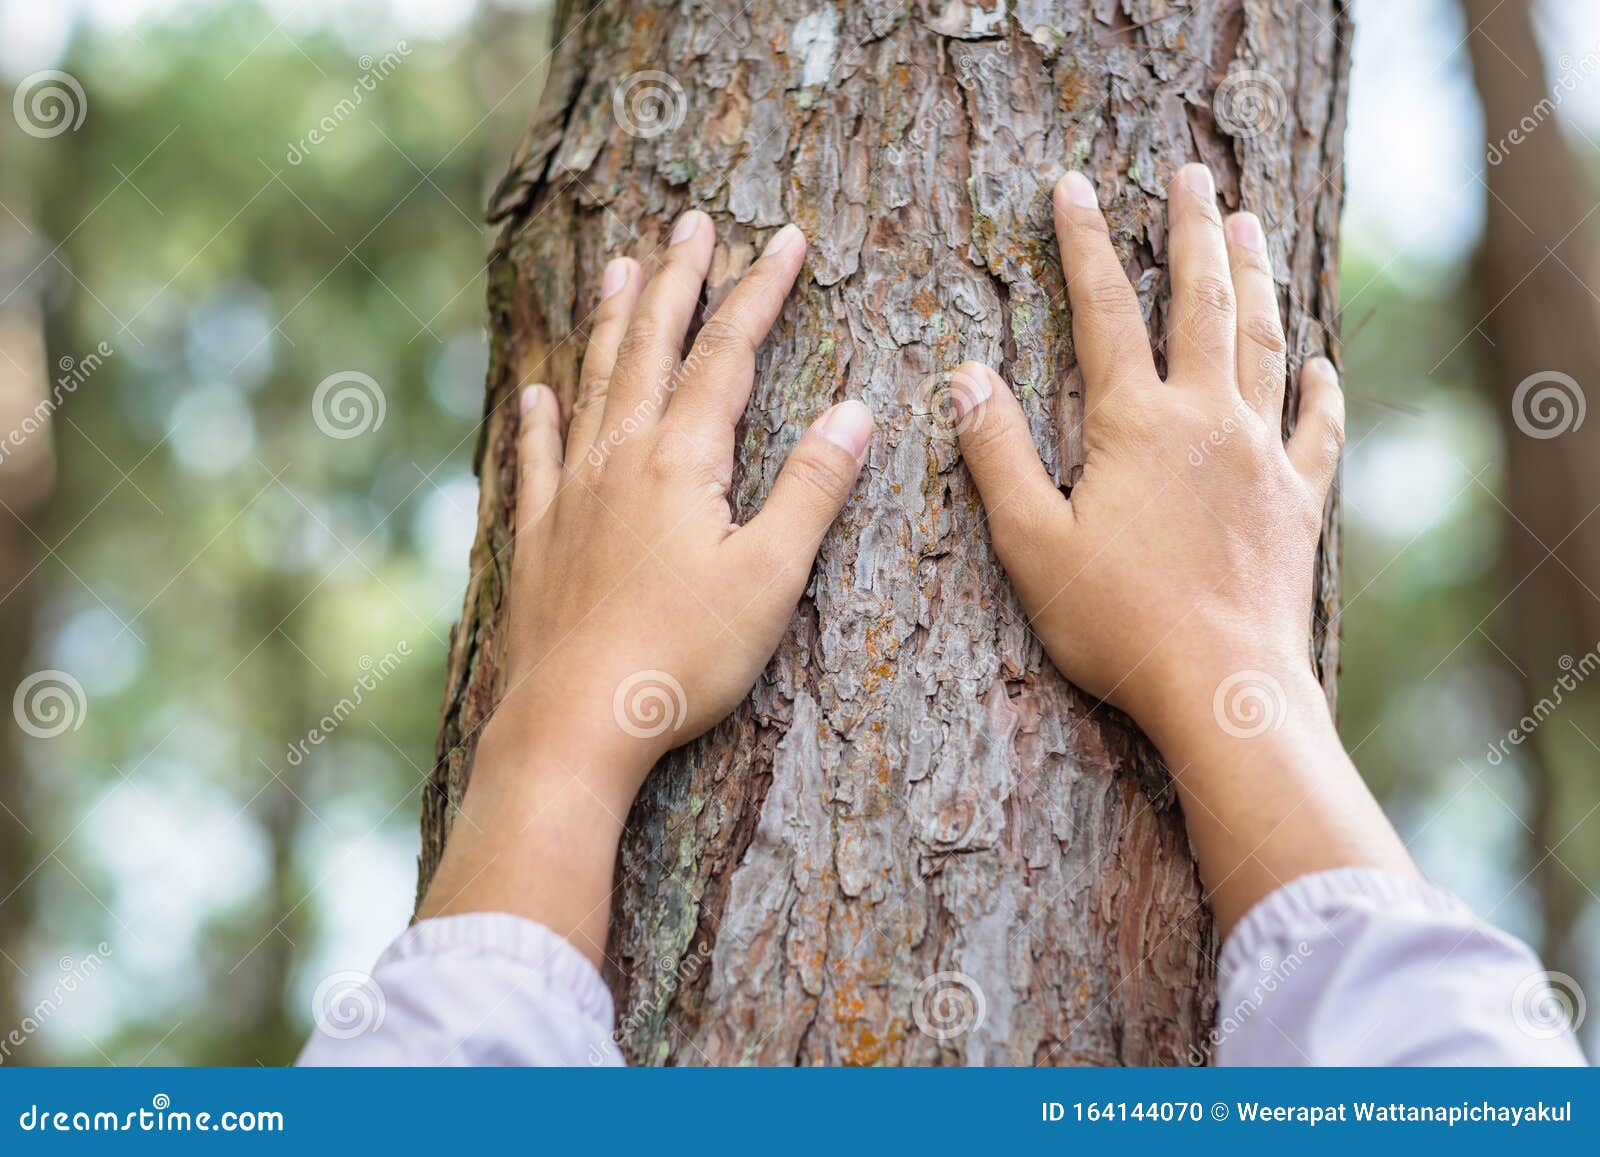 hands touch the pine tree